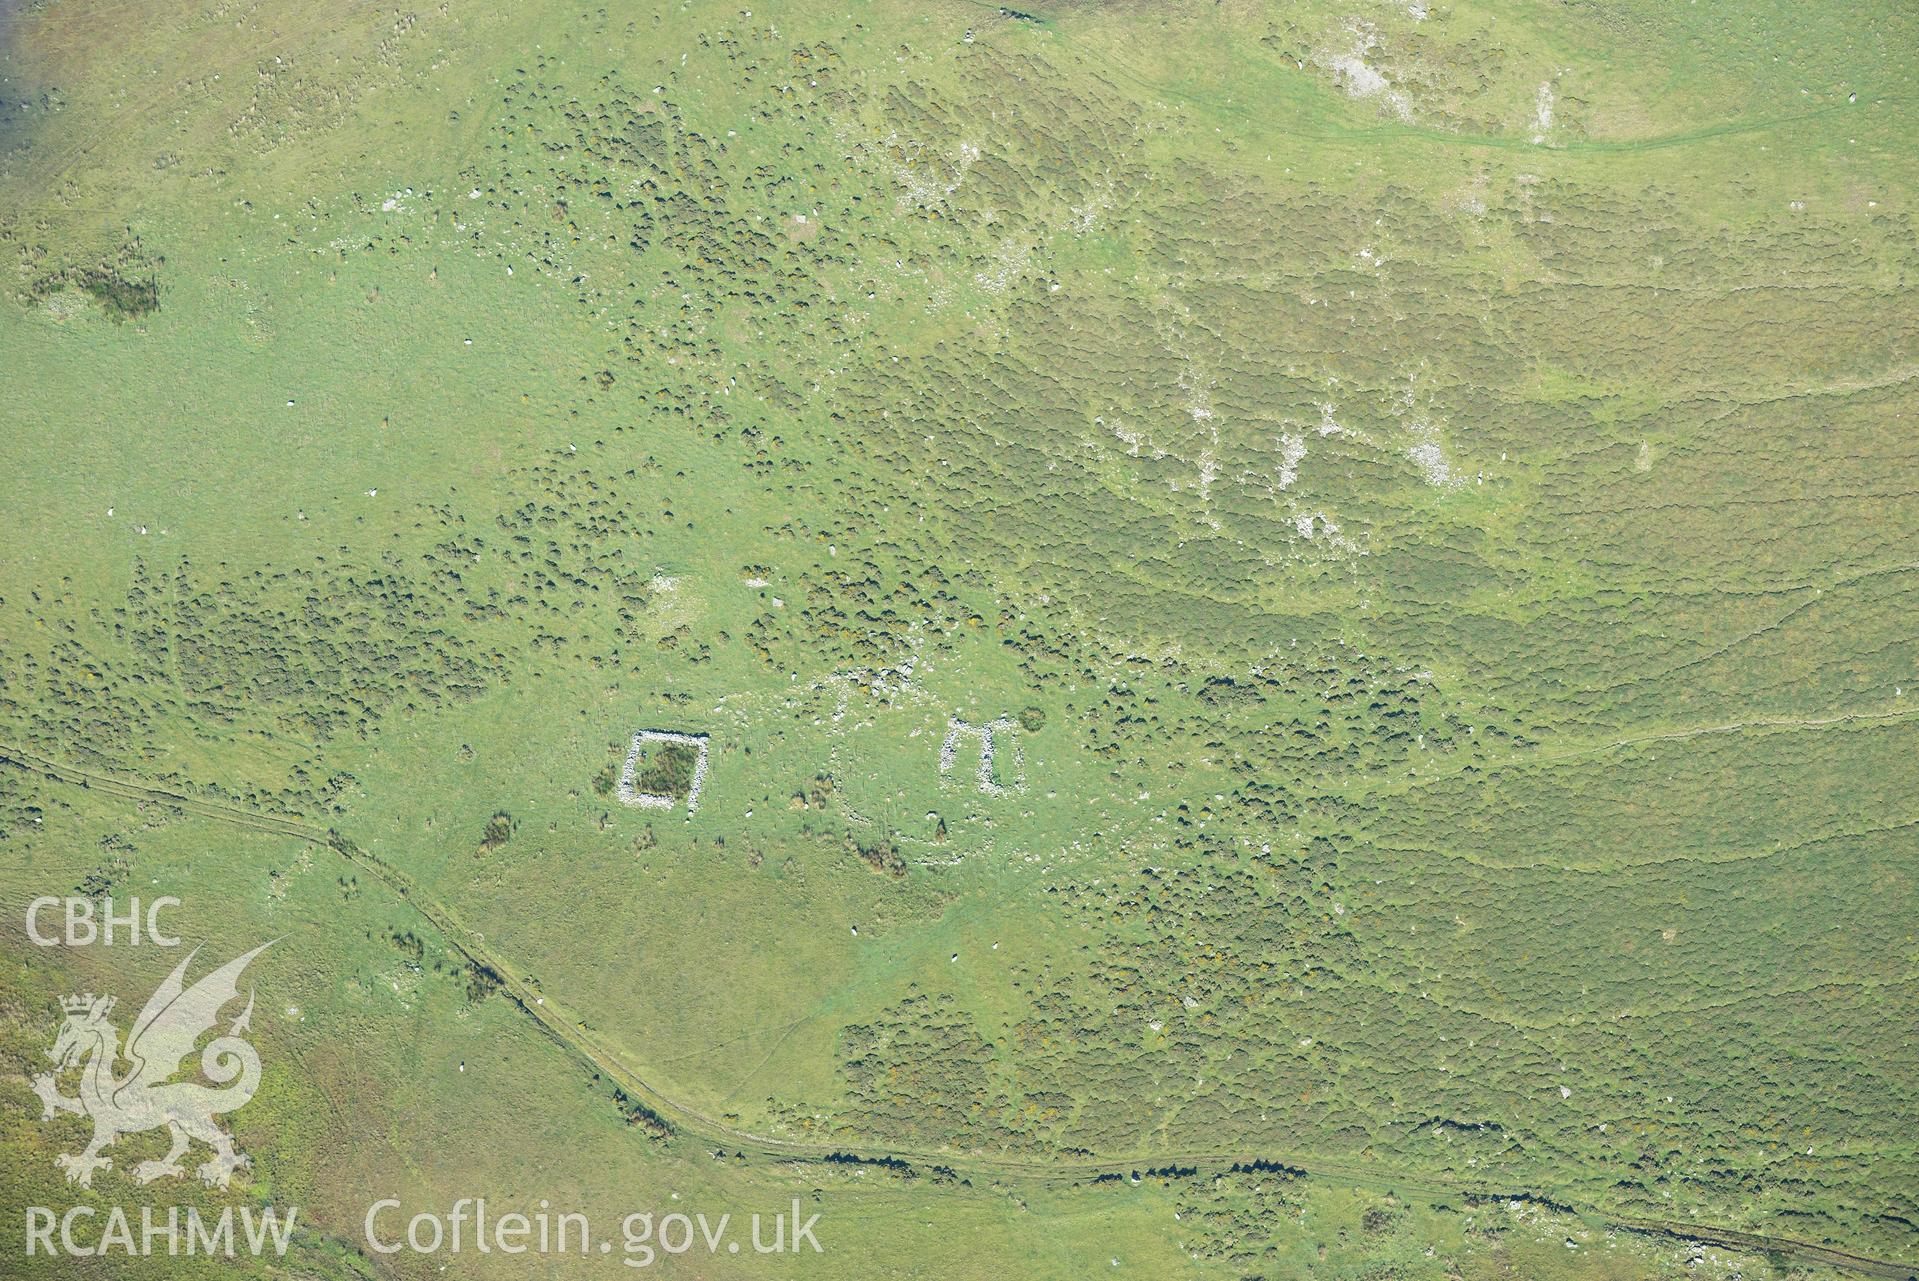 Ruined building and sheepfold east of Hafoty Fach near Llynnau Cregennen, Cadair Idris. Oblique aerial photograph taken during the Royal Commission's programme of archaeological aerial reconnaissance by Toby Driver on 2nd October 2015.